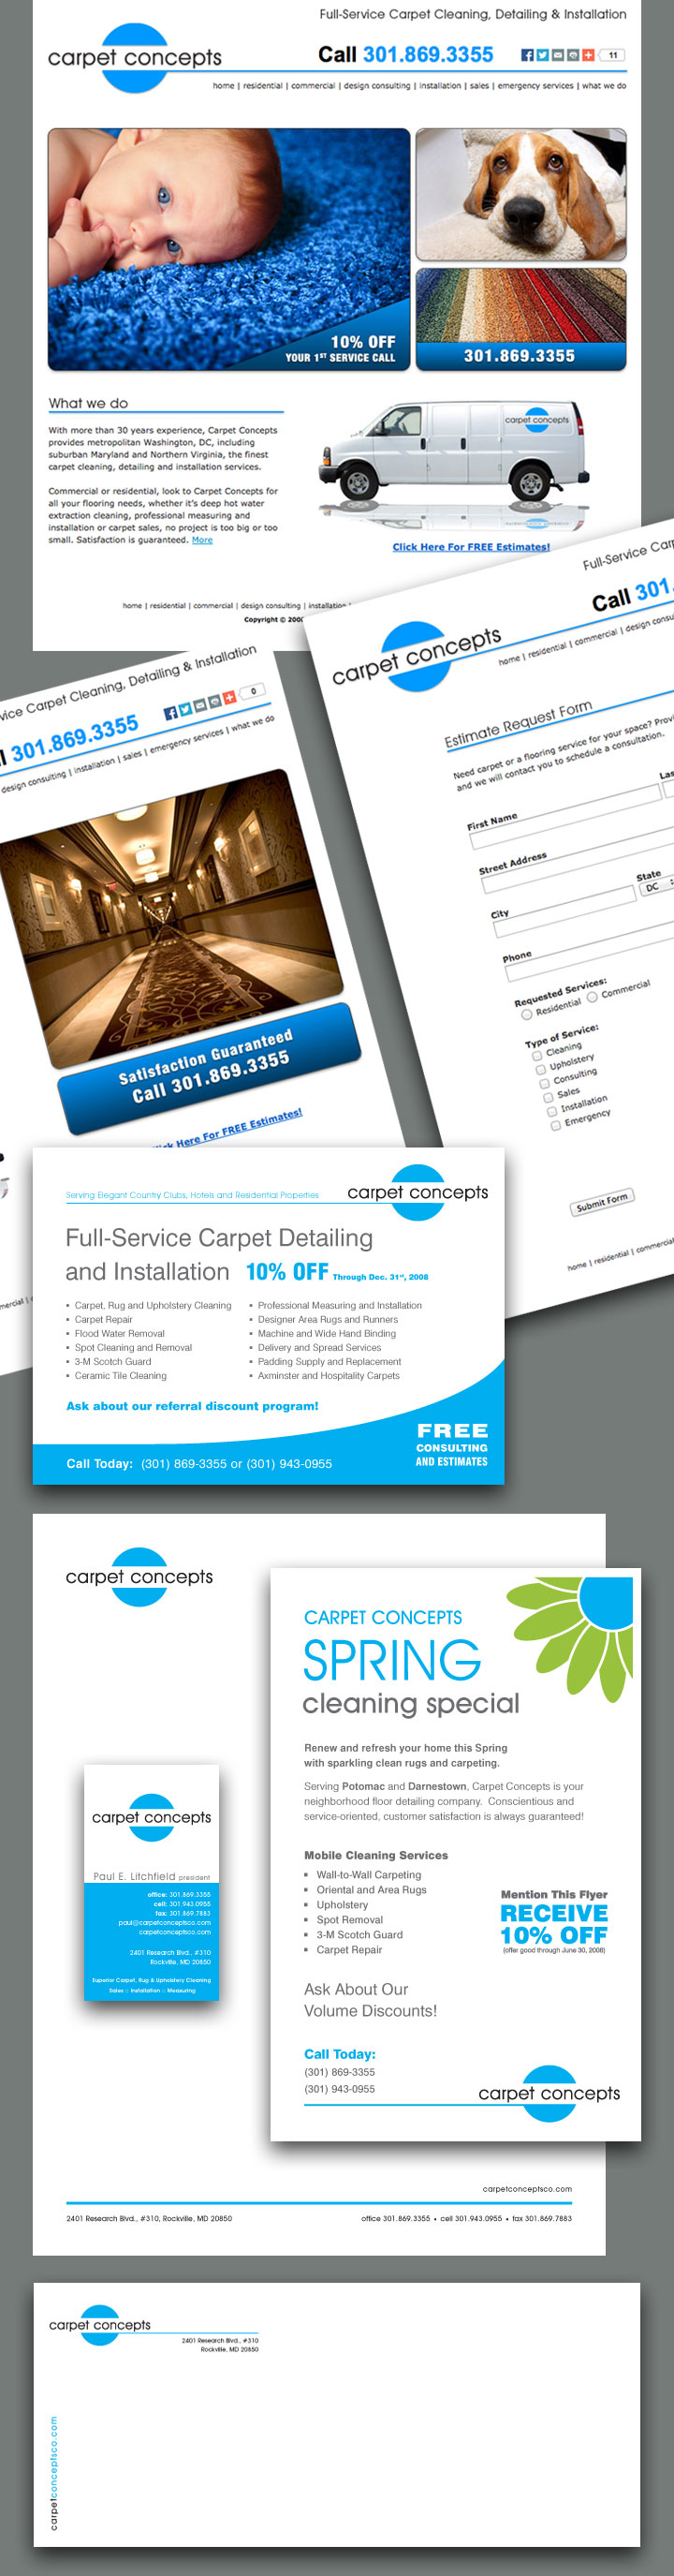 Carpet Concepts Website and Collateral